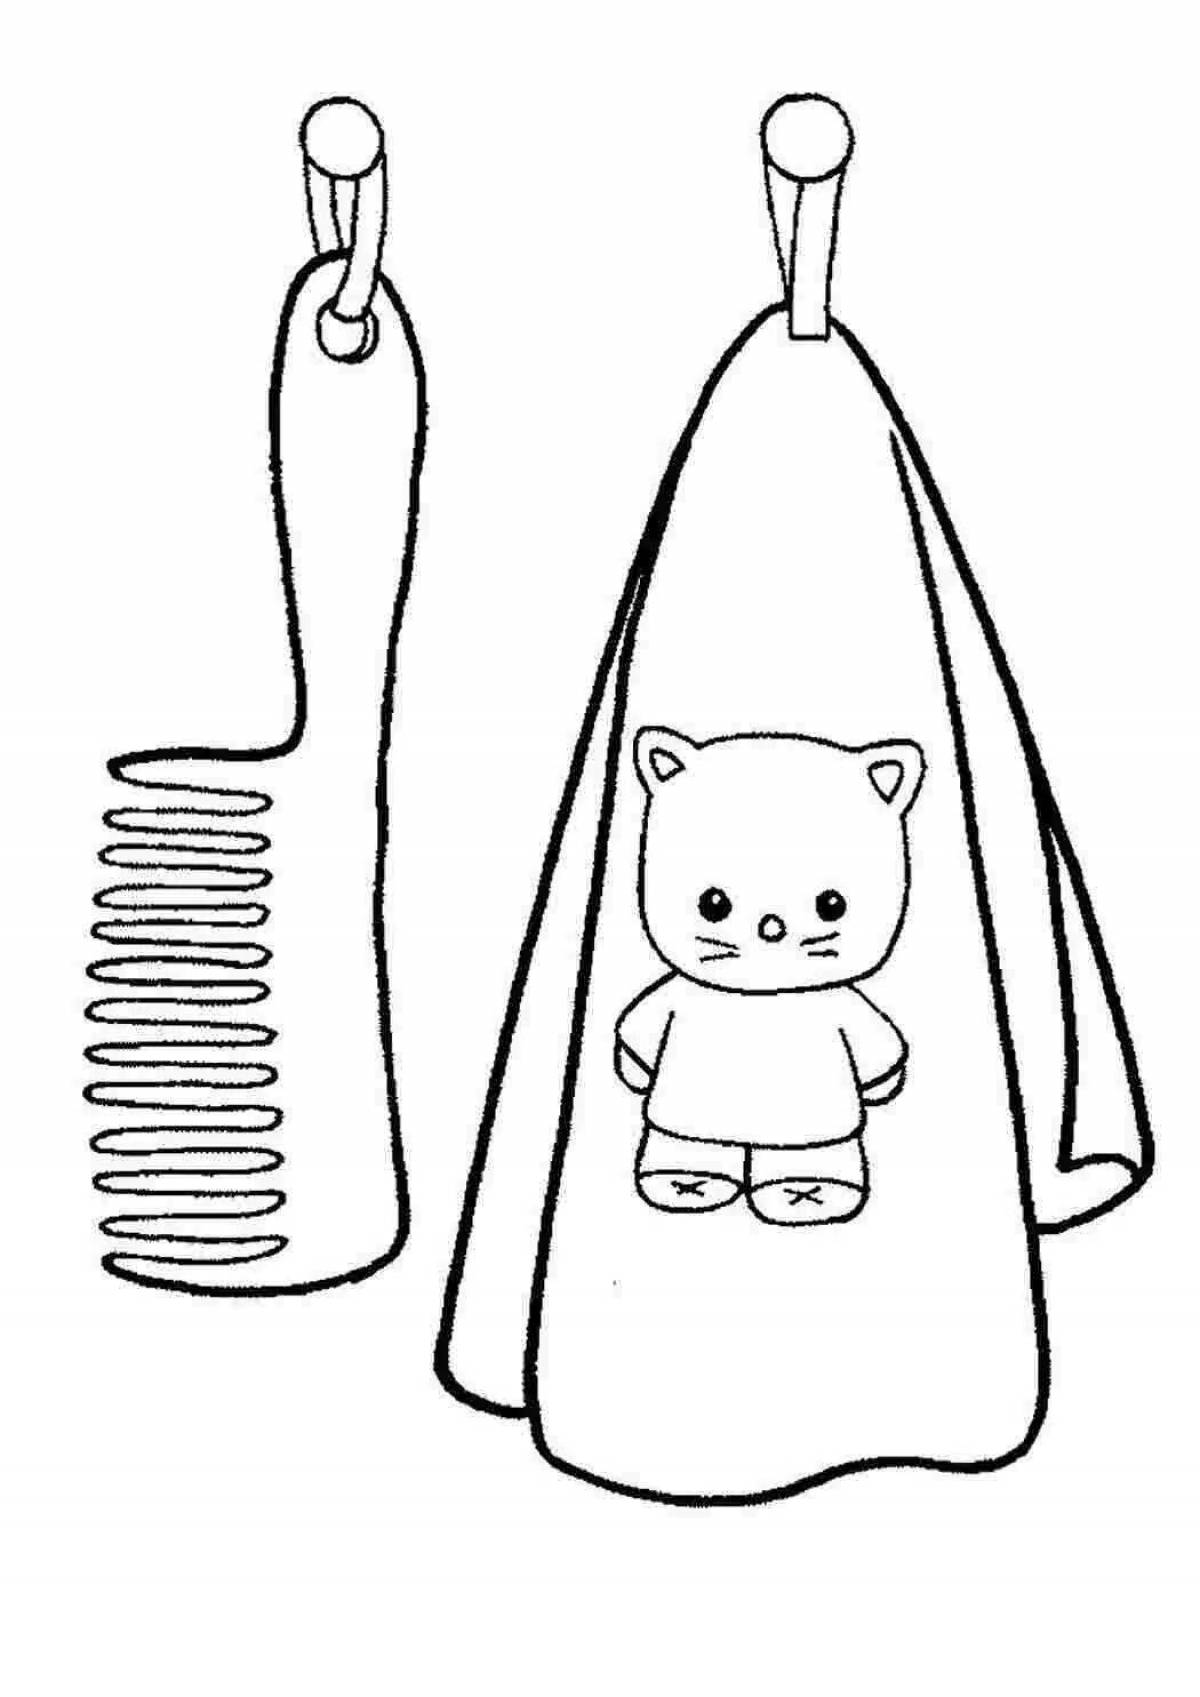 Fun coloring of towels for children